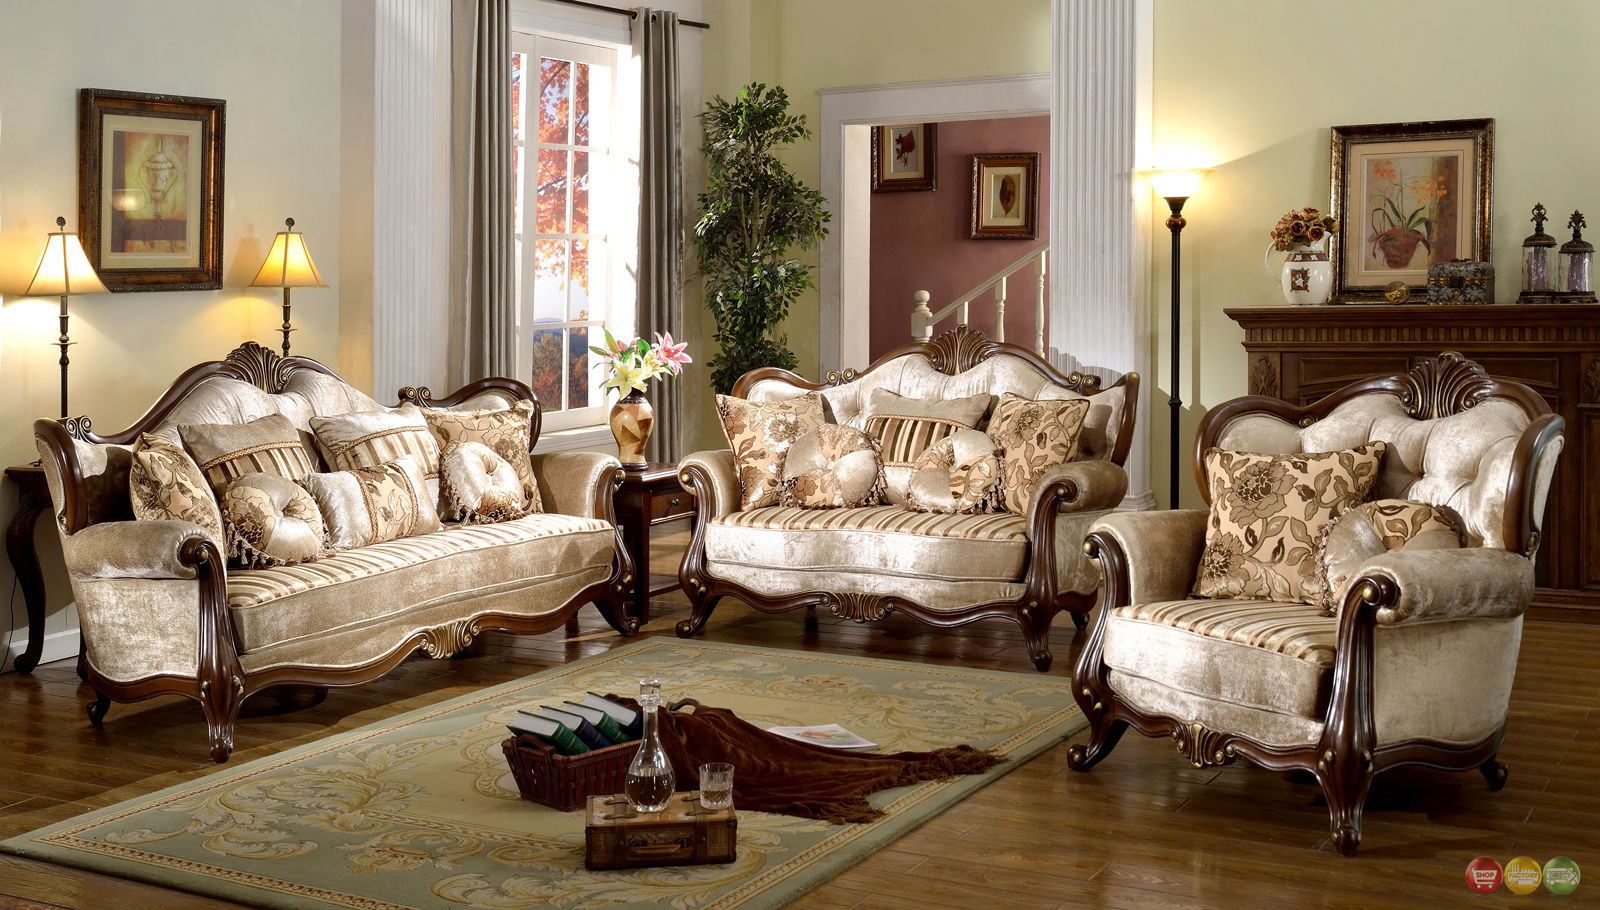 Details about French Provincial Formal Antique Style Living Room Furniture  Set Beige Chenille